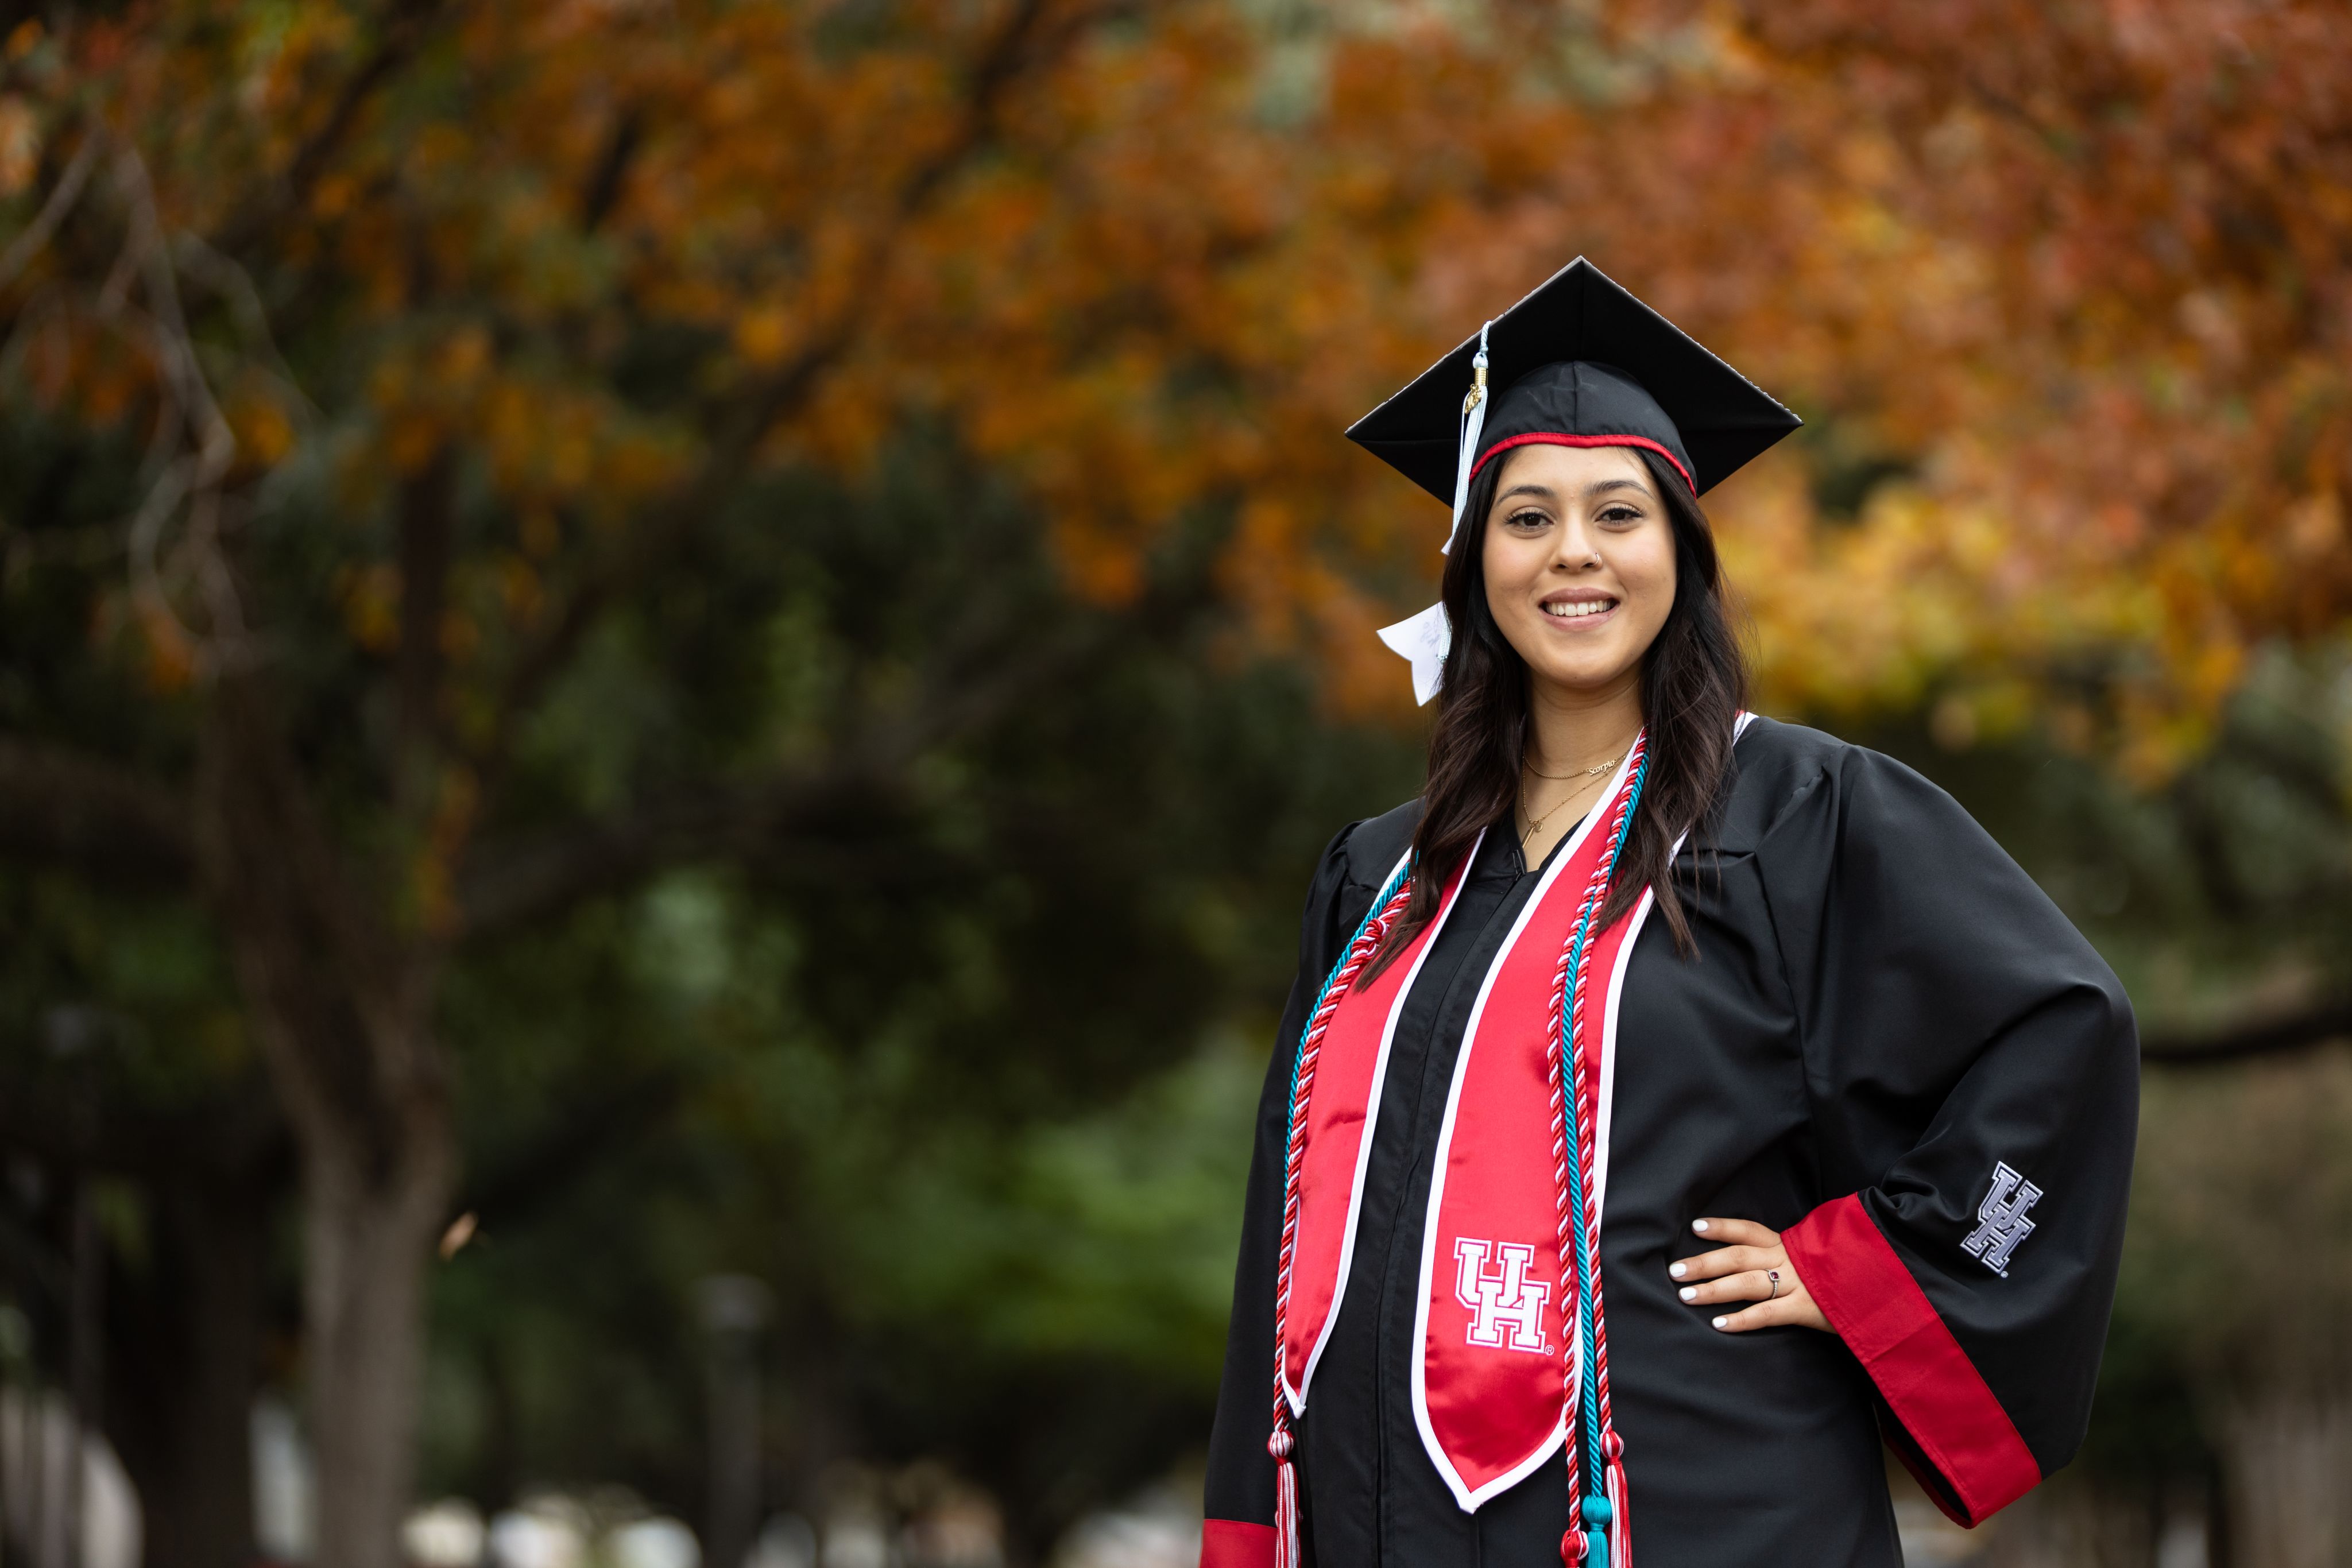 Women wearing black graduation cap and gown standing in front of trees